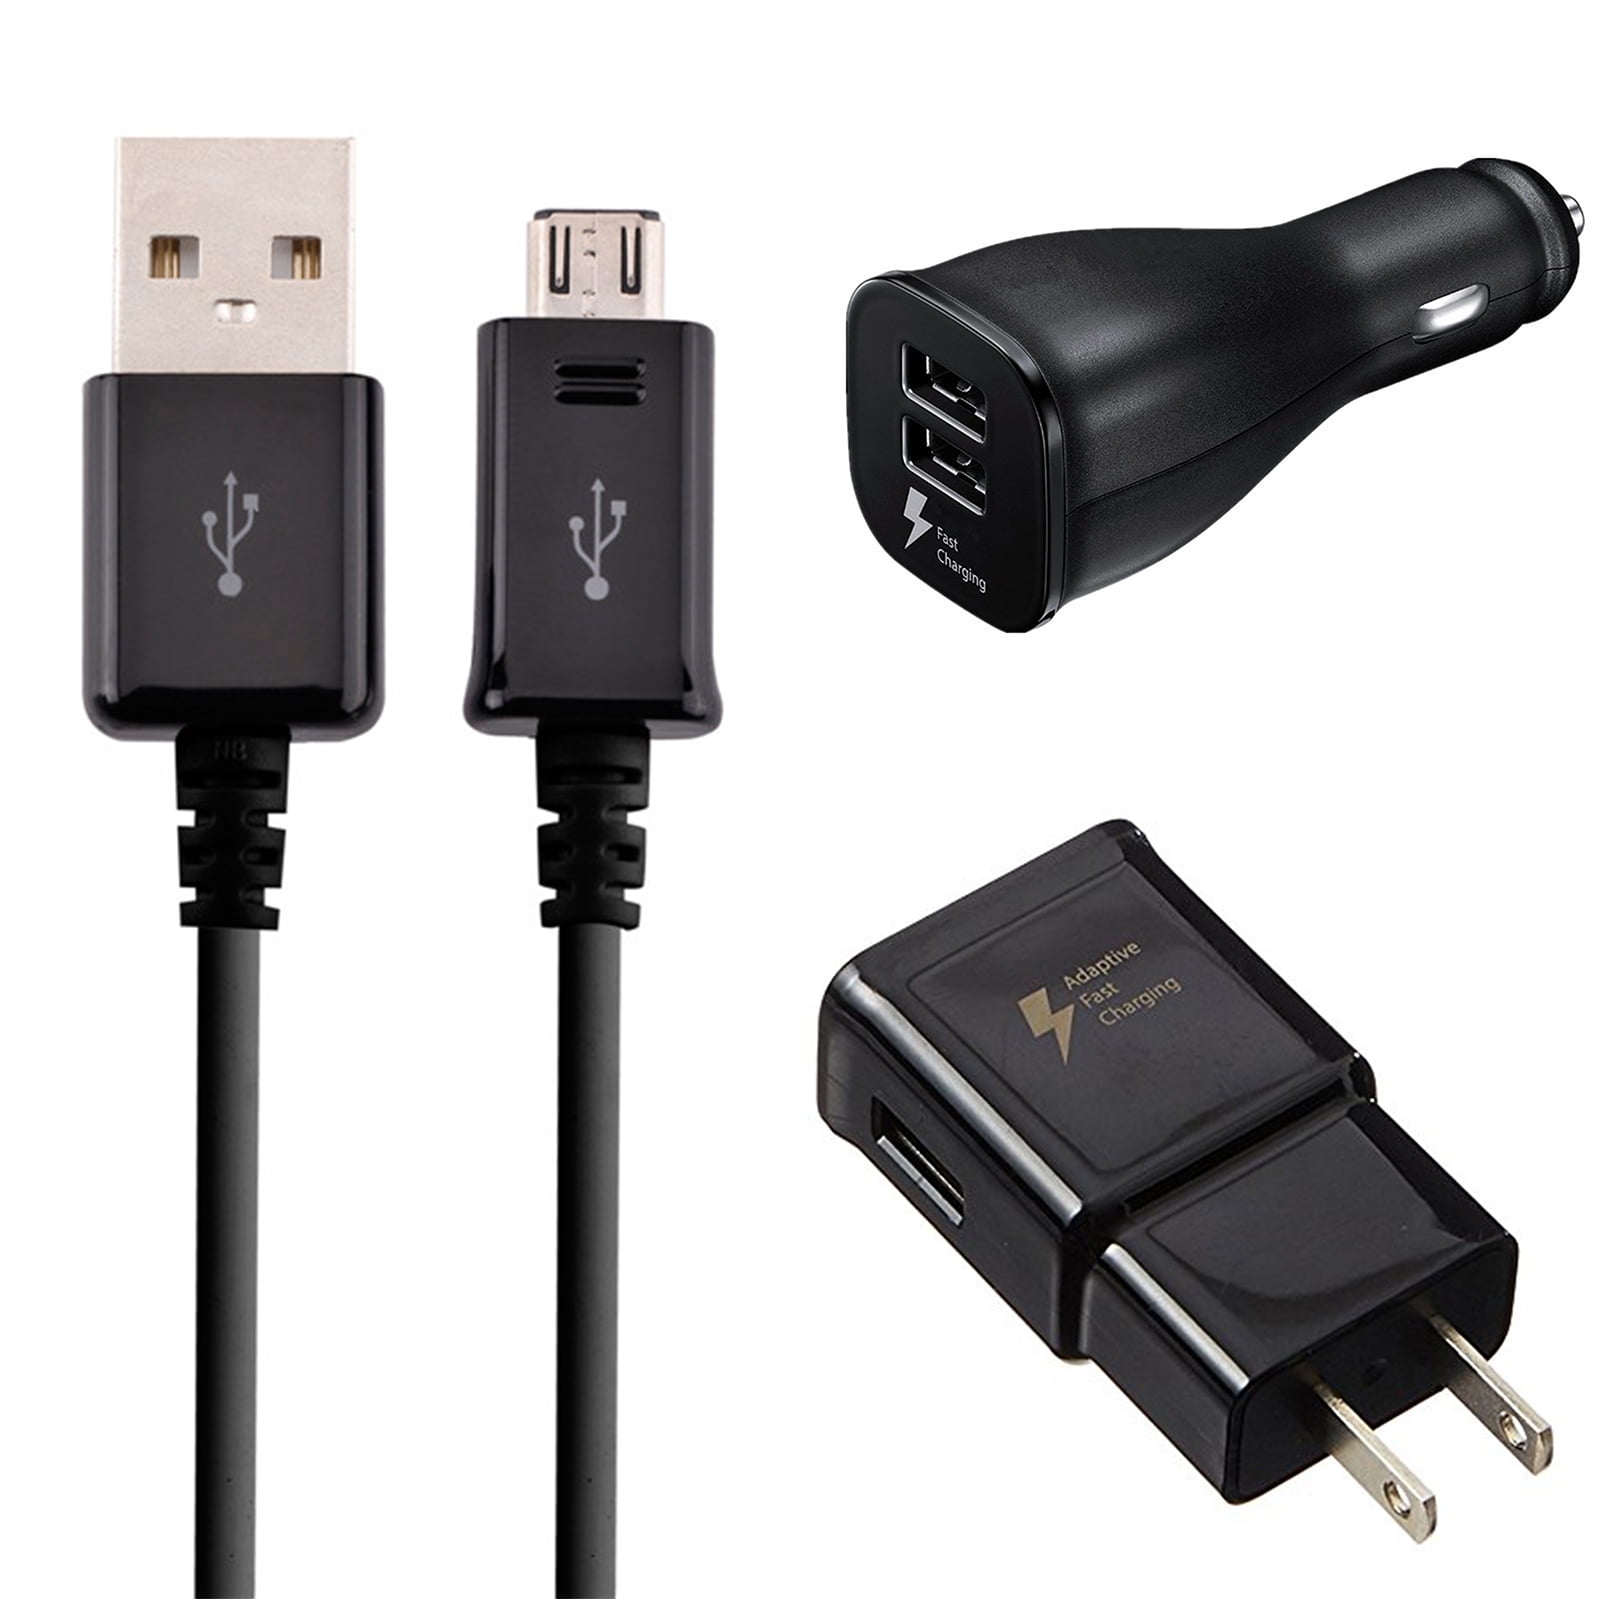 golf Picasso Groenten OEM Samsung Galaxy S6/S6 edge Galaxy S7 edge Adaptive Fast Charger Micro  USB 2.0 Cable Kit [1 Wall Charger + 1 Car Charger + 5FT Micro USB Cable]  AFC dual voltages 50%